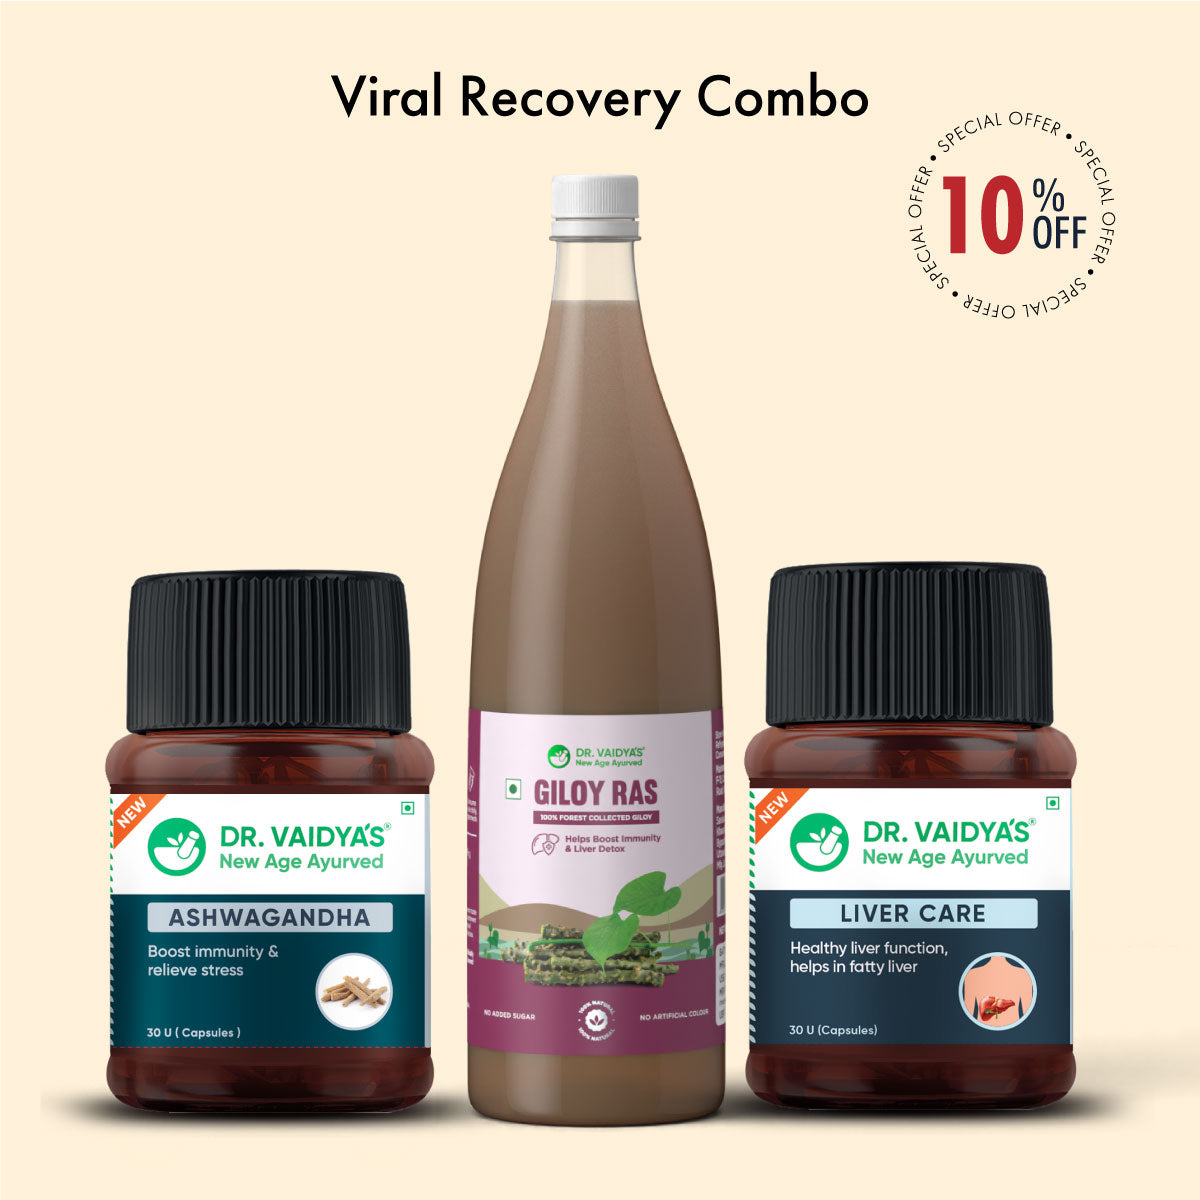 Viral Recovery Combo